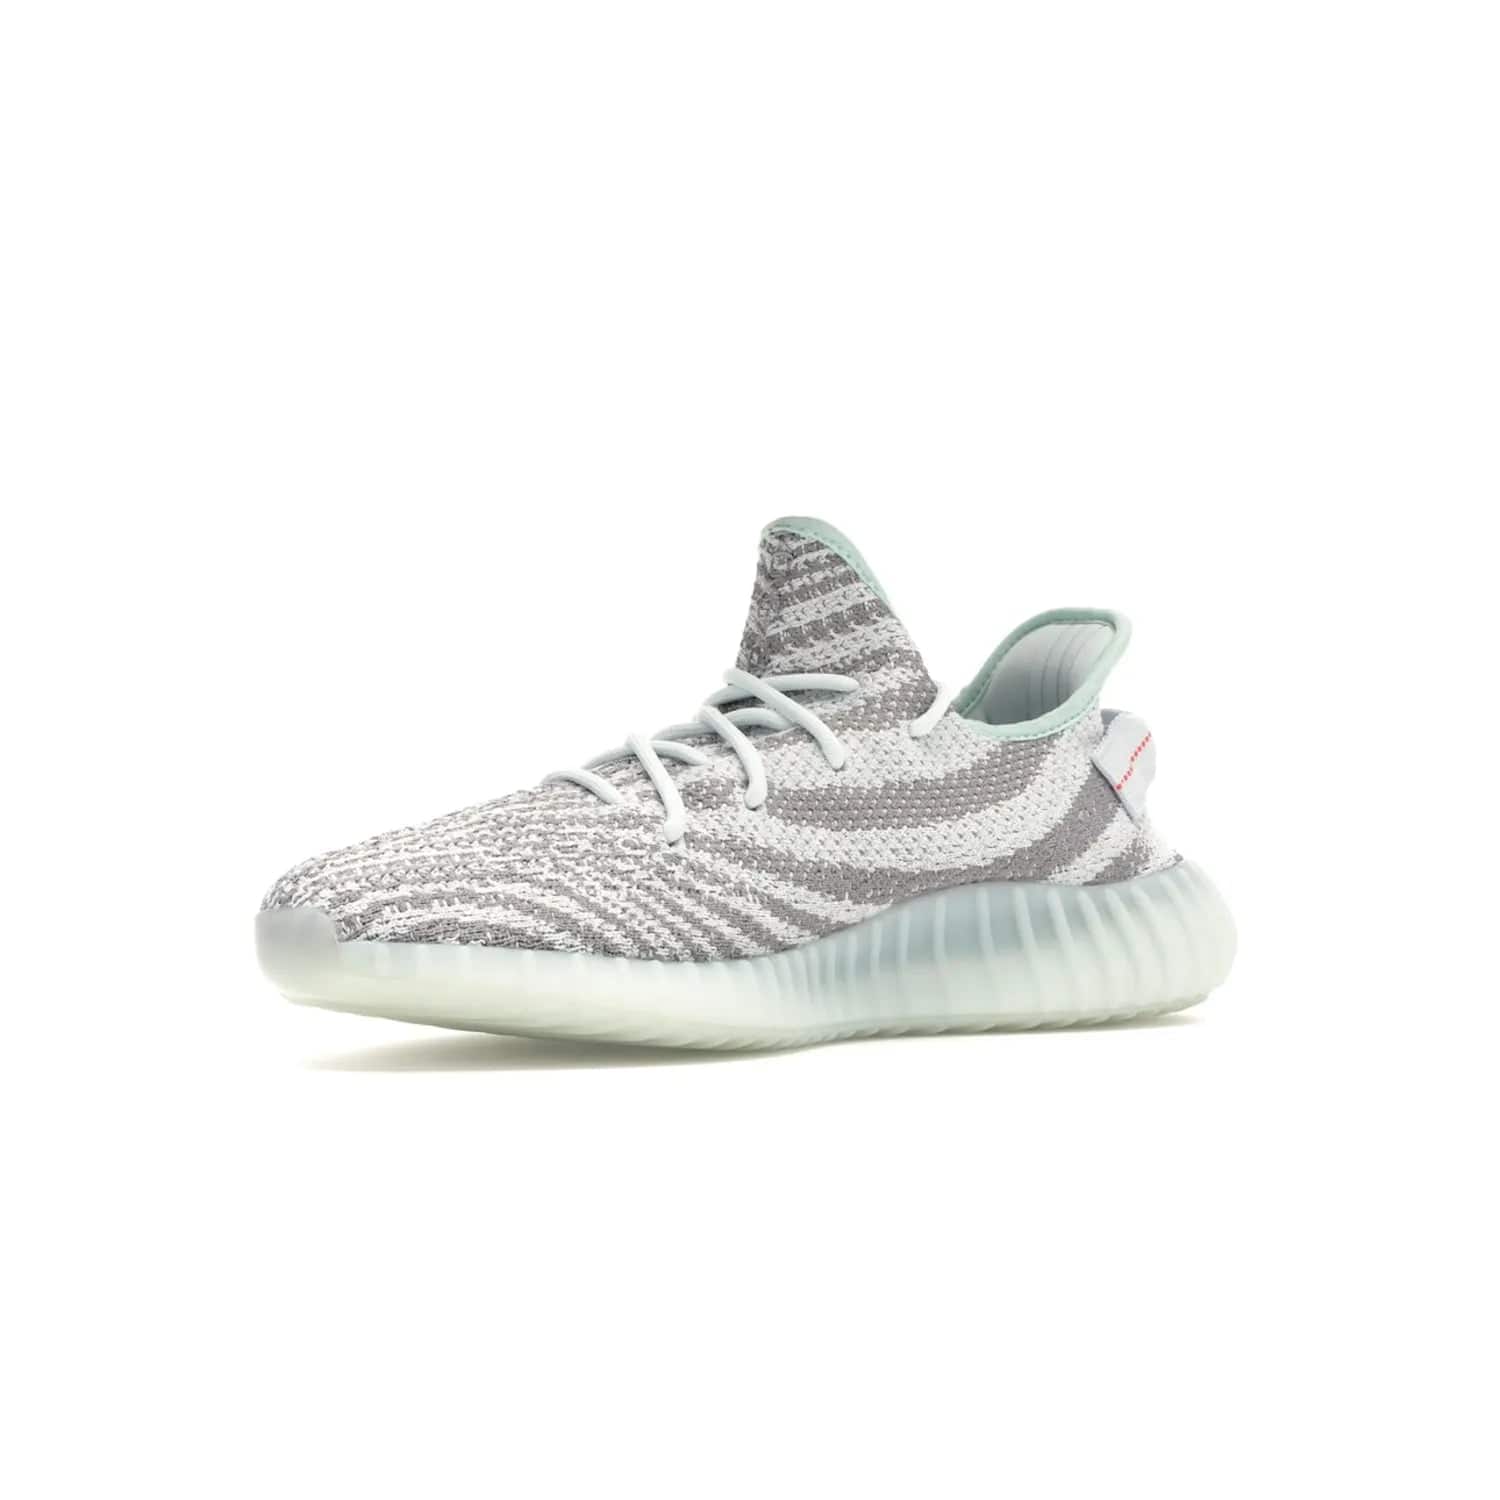 adidas Yeezy Boost 350 V2 Blue Tint - Image 16 - Only at www.BallersClubKickz.com - The adidas Yeezy Boost 350 V2 Blue Tint merges fashion and functionality with its Primeknit upper and Boost sole. Released in December 2017, this luxurious sneaker is perfect for making a stylish statement.